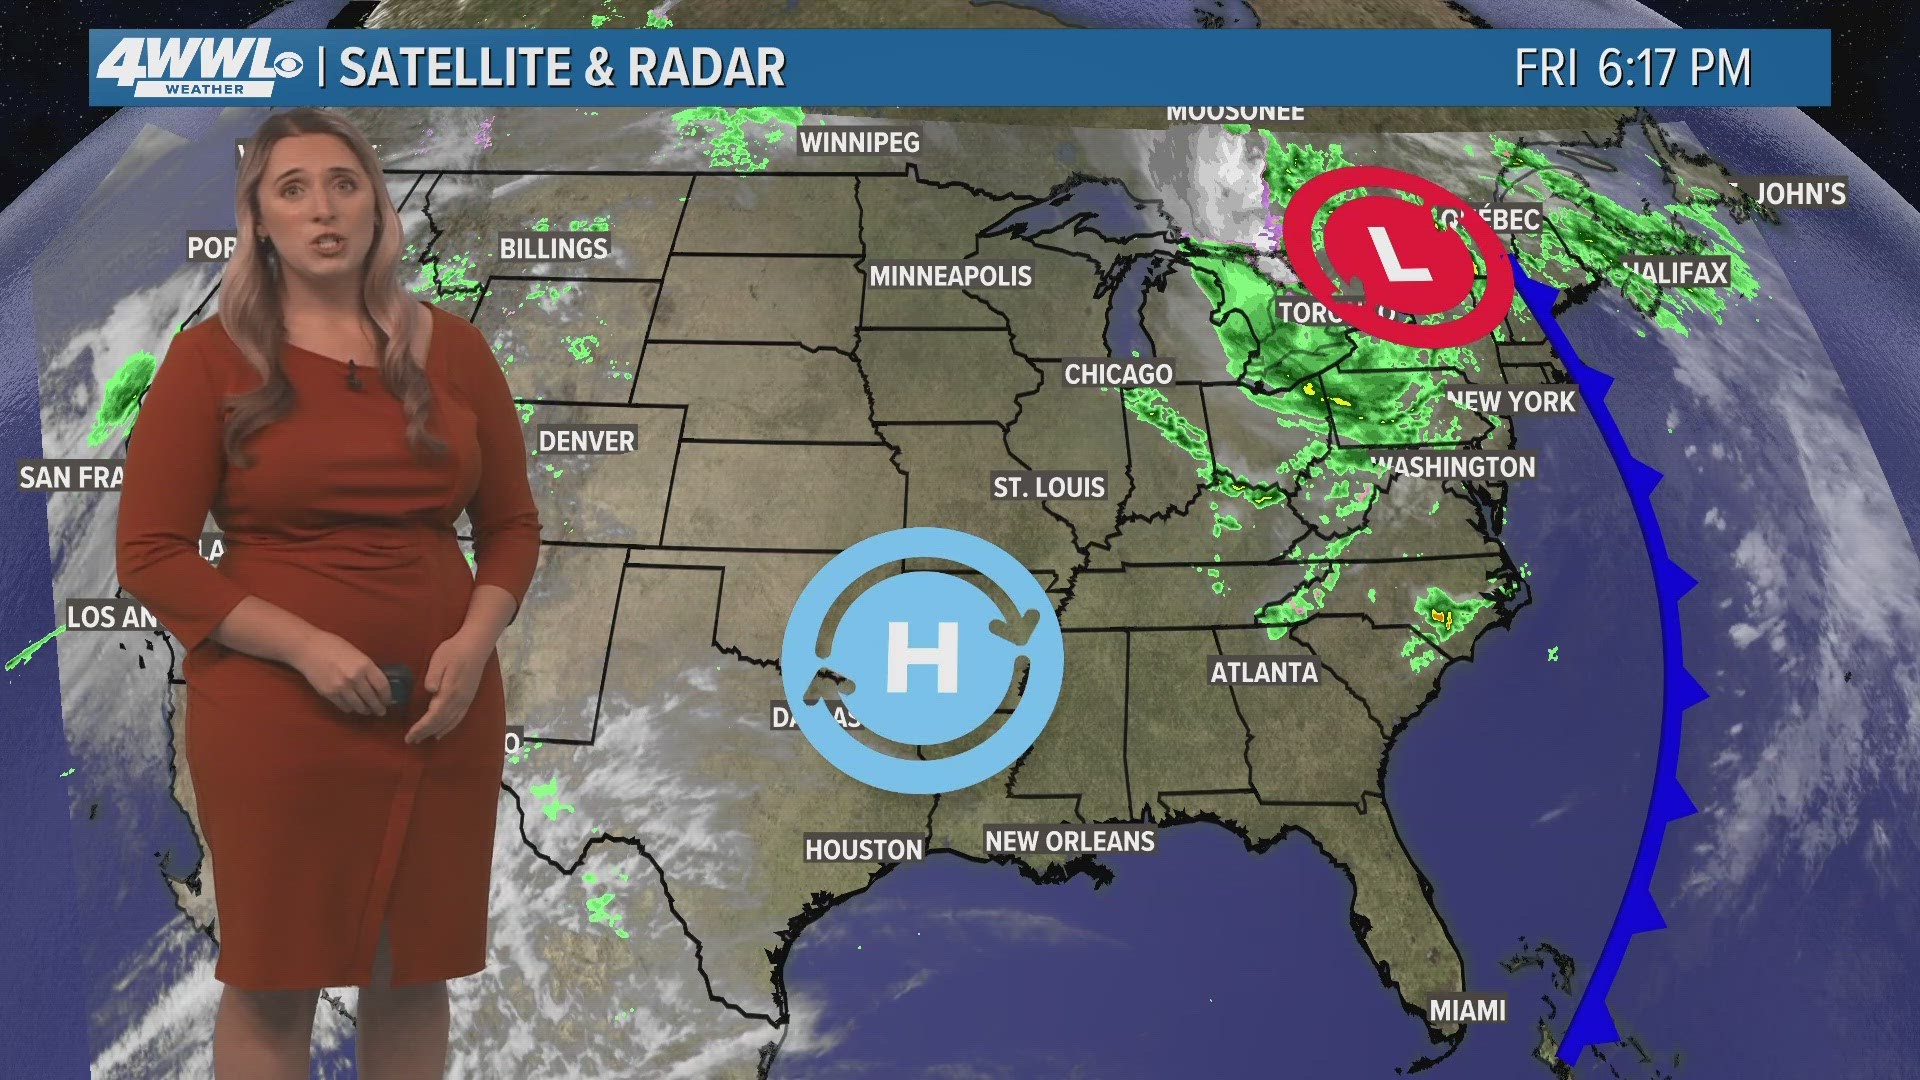 Meteorologist Alexa Trischler says sunny skies are on tap this weekend with low humidity.